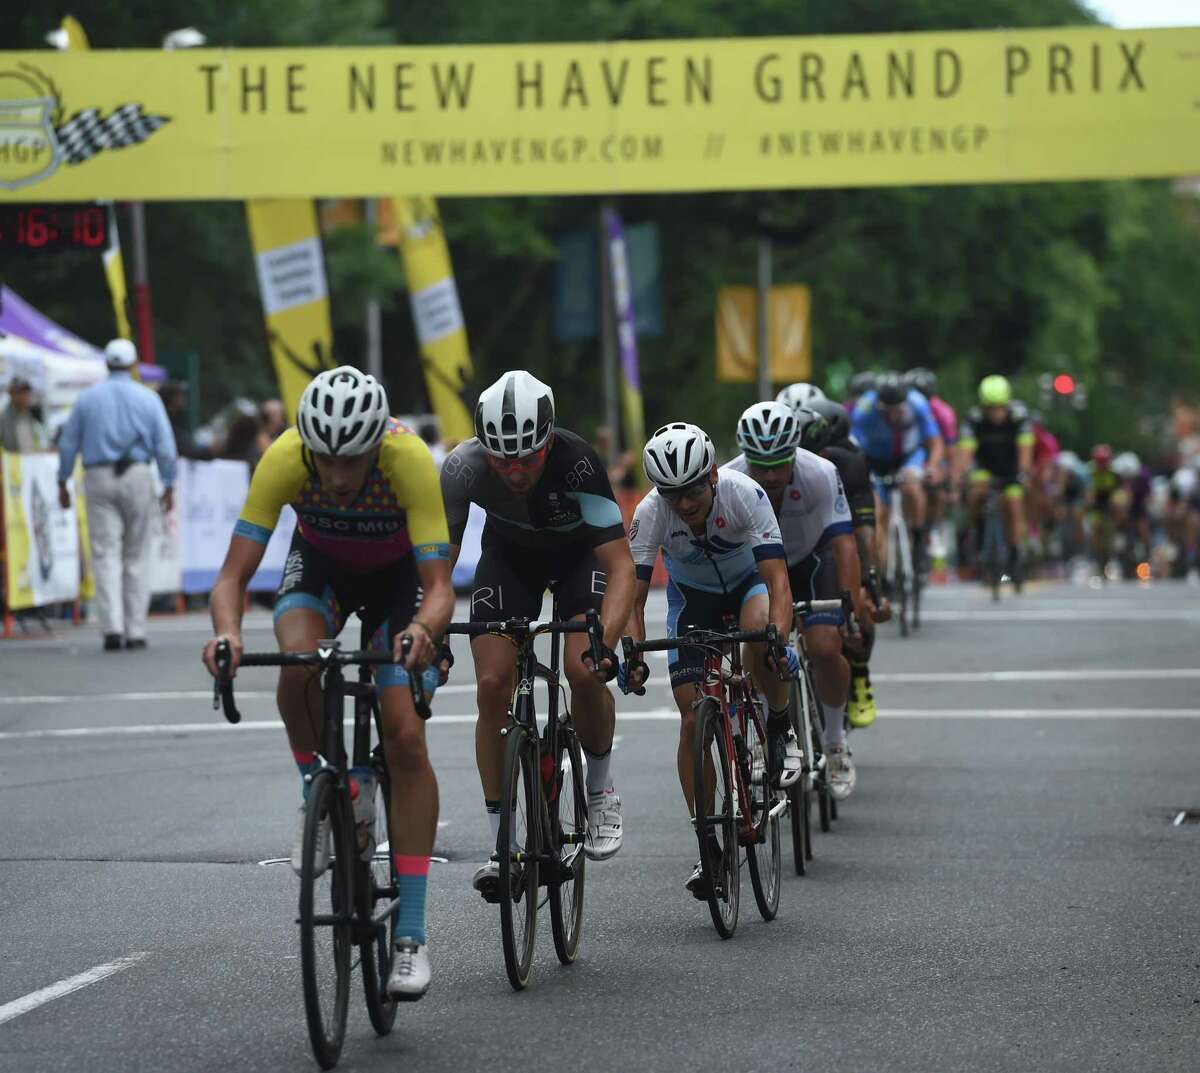 Riders compete in the New Haven Grand Prix in downtown New Haven on September 14, 2018. The twilight bicycle race and street festival will also take place on Saturday September 15th.